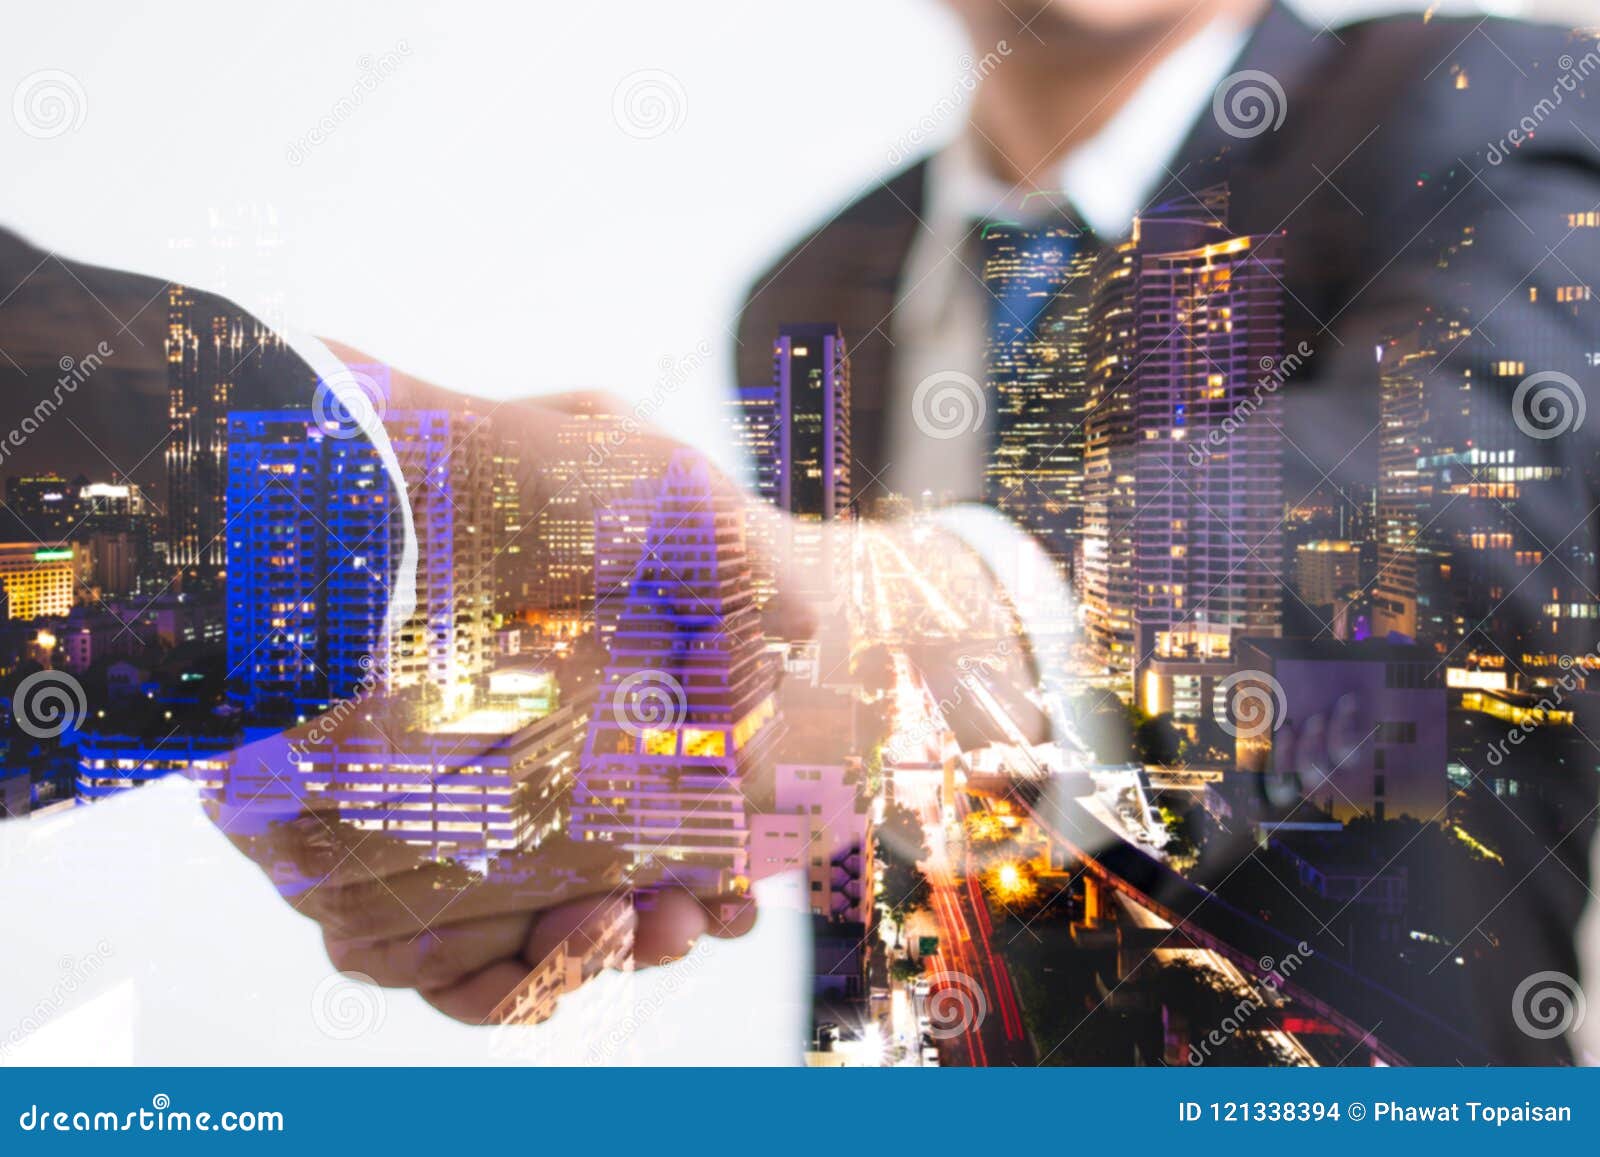 double exposure concept. investor business handshake with city night. businessman shaking hands